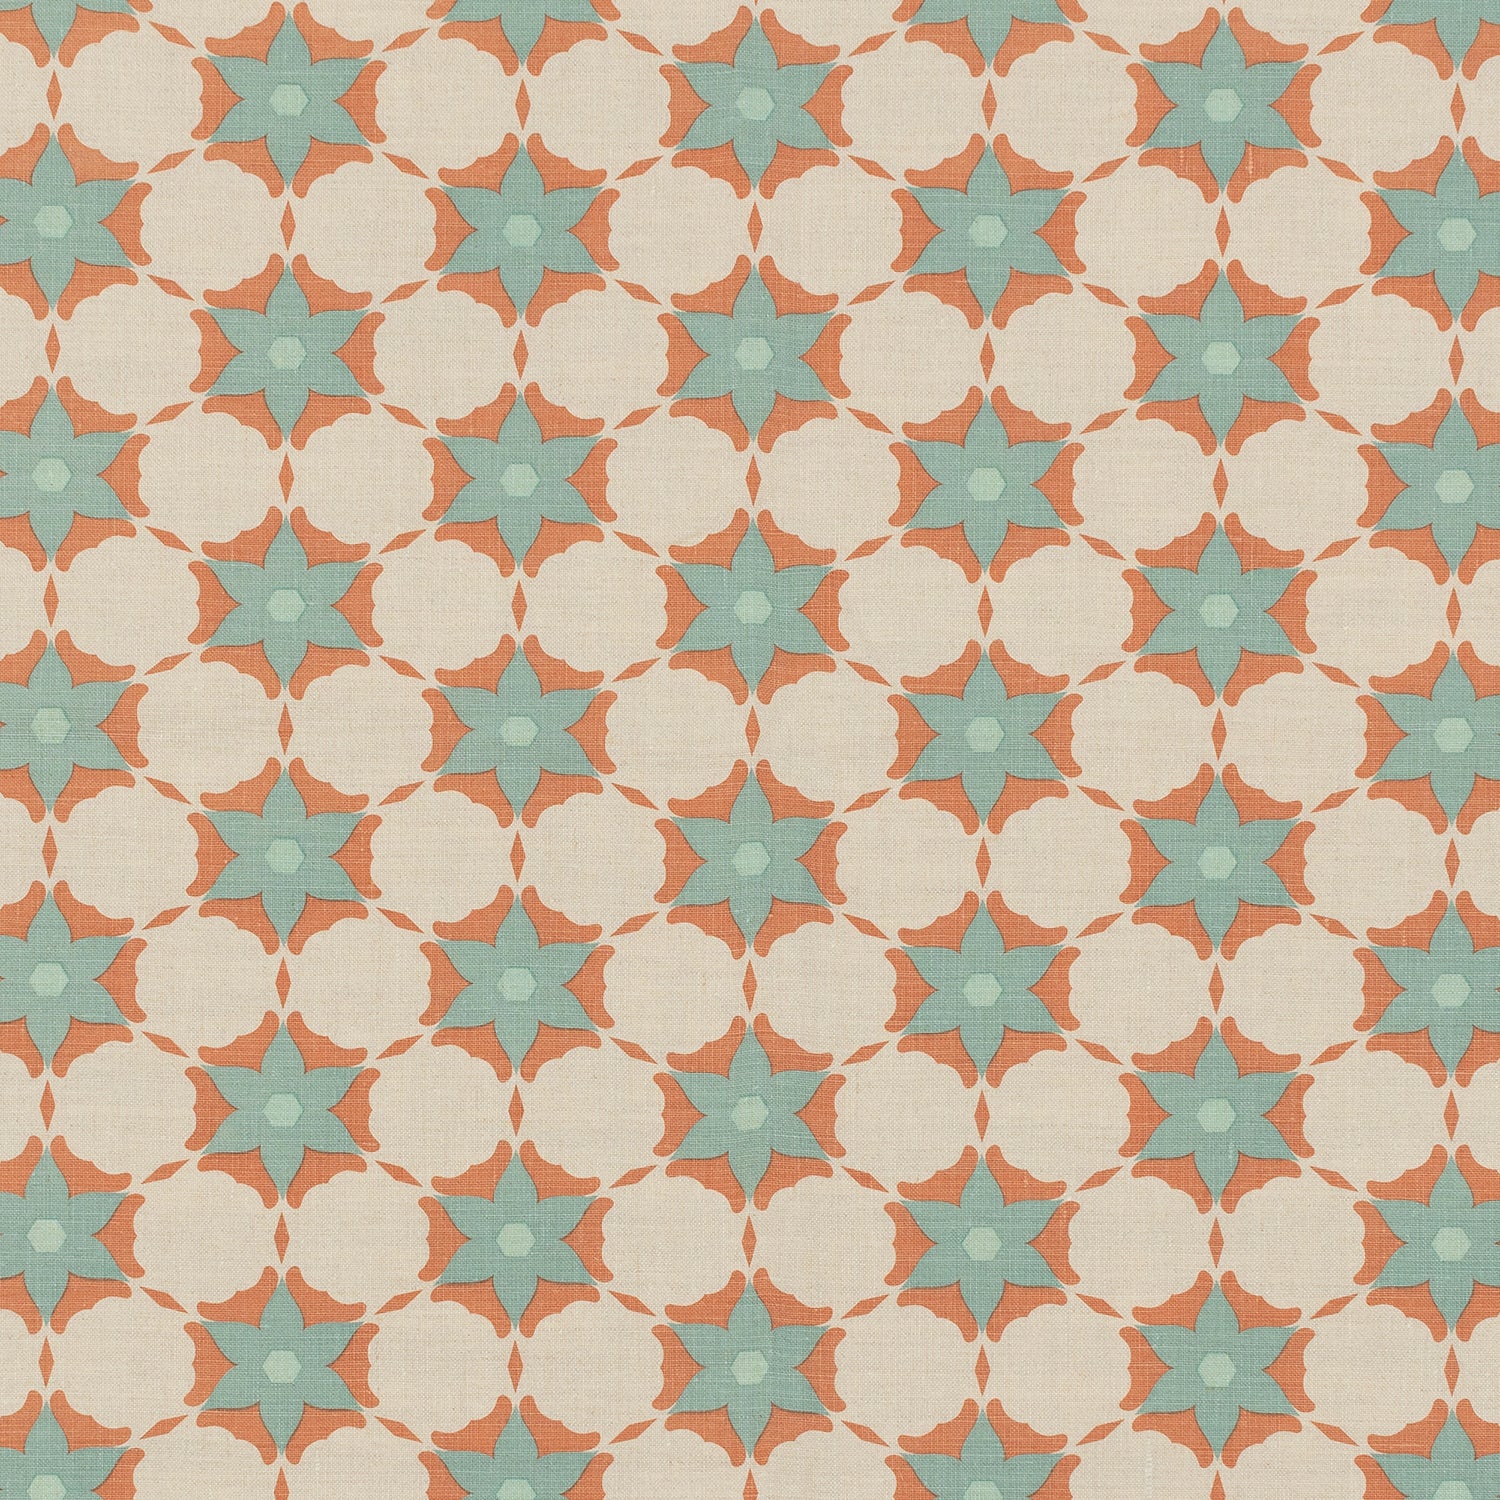 Woven fabric in a floral lattice print in blue and coral on a tan field.